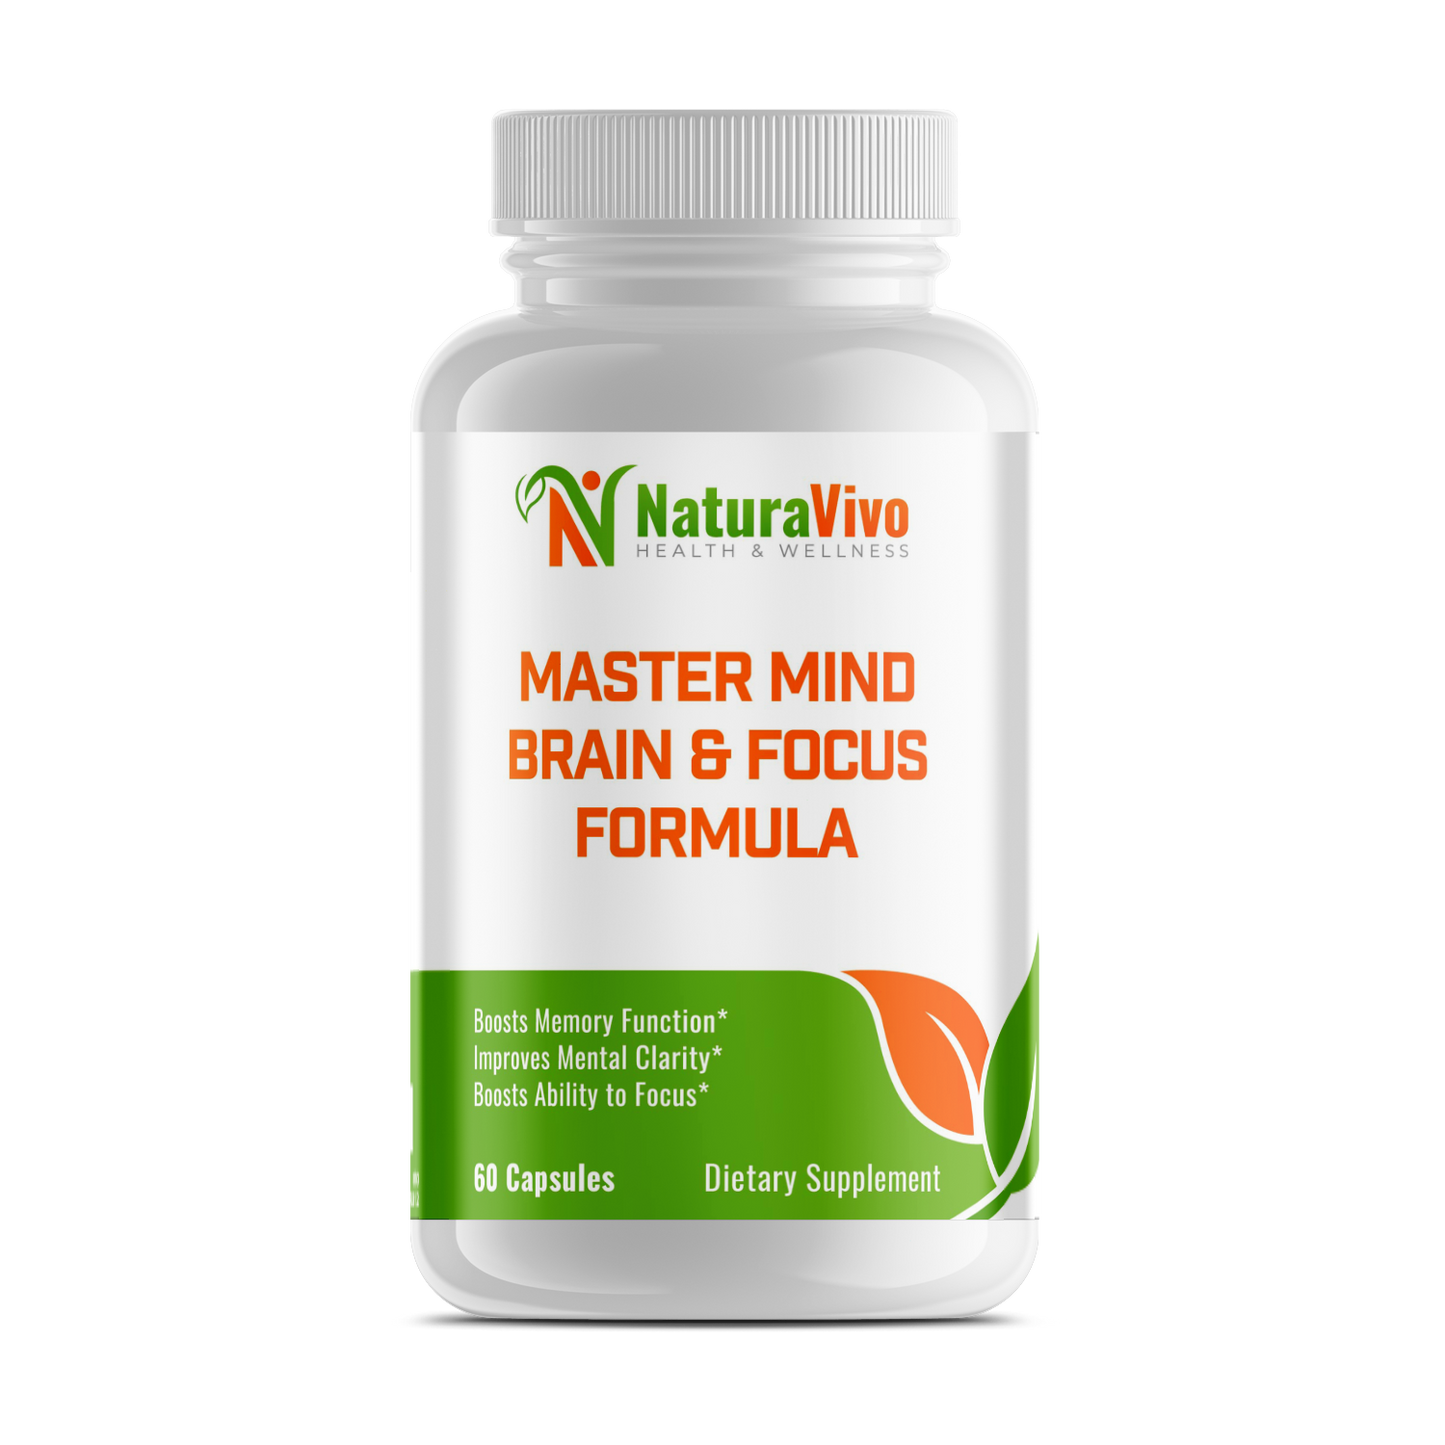 Ultimate Mind Enhancement & Relaxation Support Bundle - Master Mind Brain & Focus Formula + MindRelief Anxiety Support